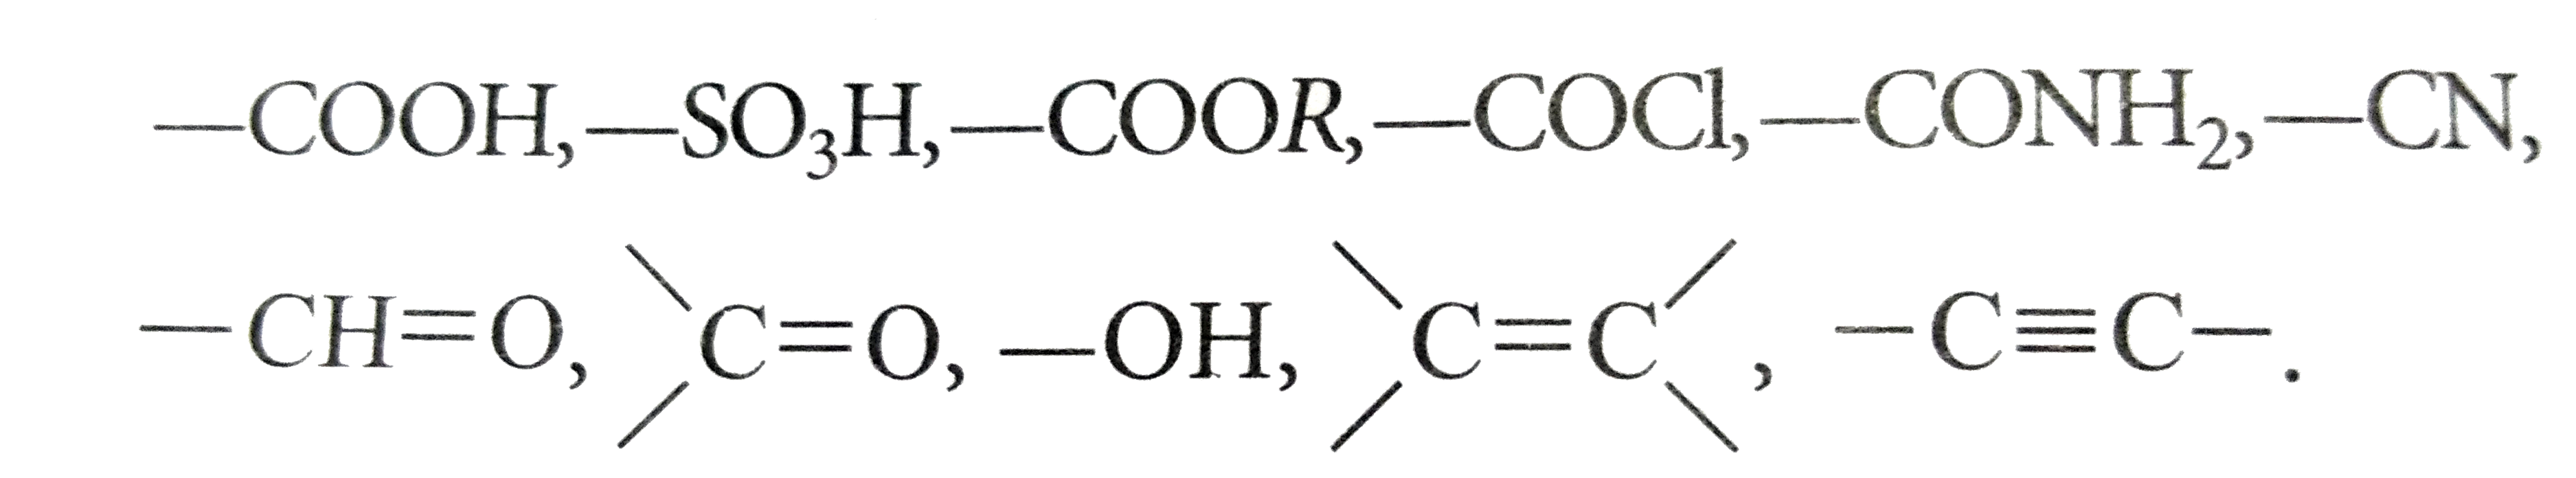 Assertion: In the case of polyfunctional compounds, the choice of principal functional group is made on the basis of order of preference.   Reason: The order of decreasing priority for some functional group is